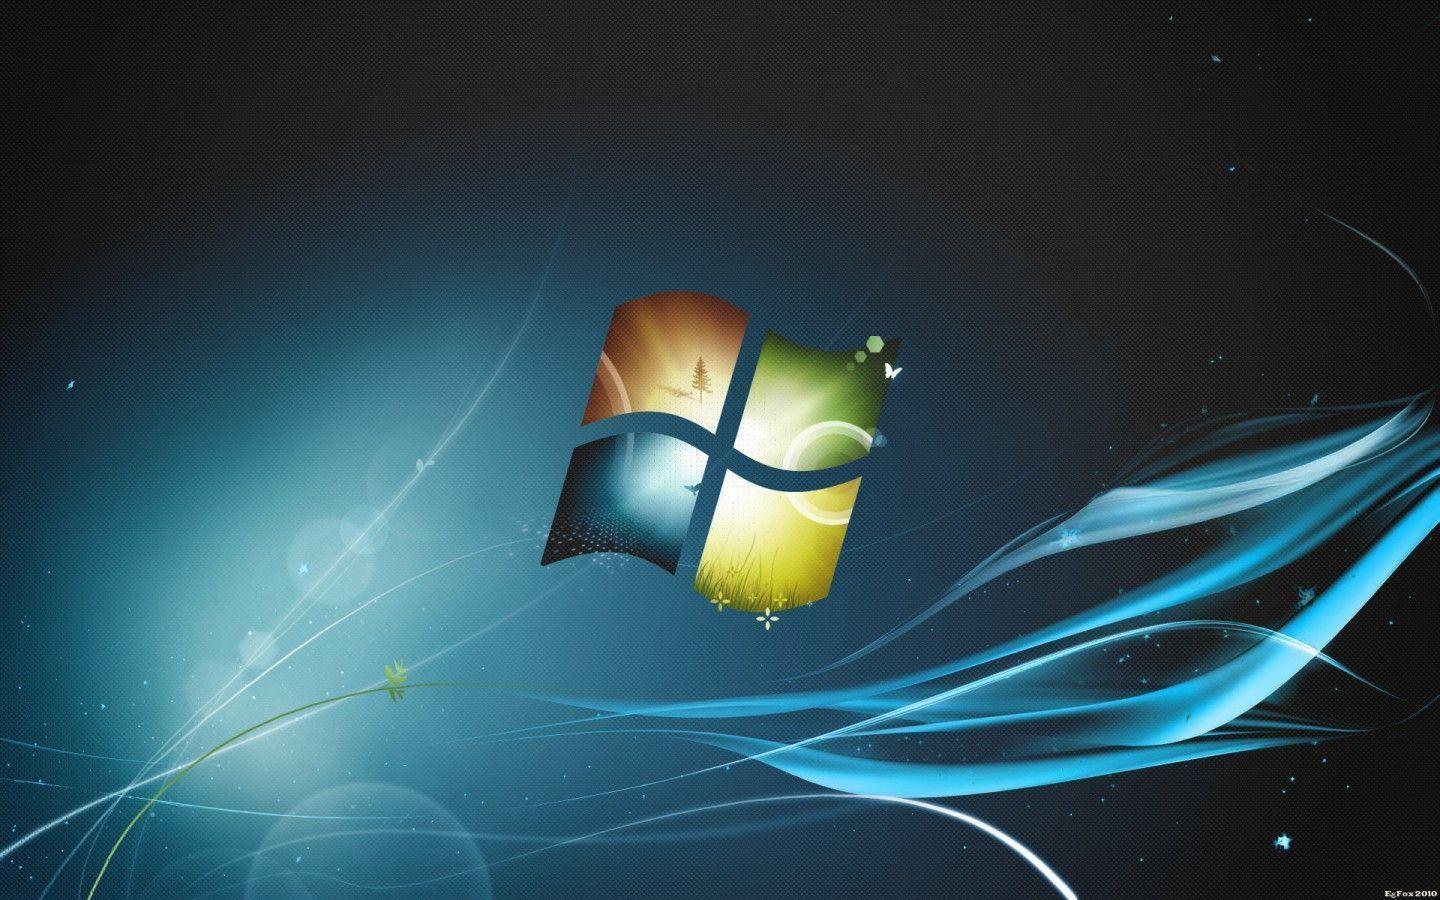 Luxurius Themes Wallpaper For Windows 7 27 In Windows Computers With Themes Wallpaper For Windows